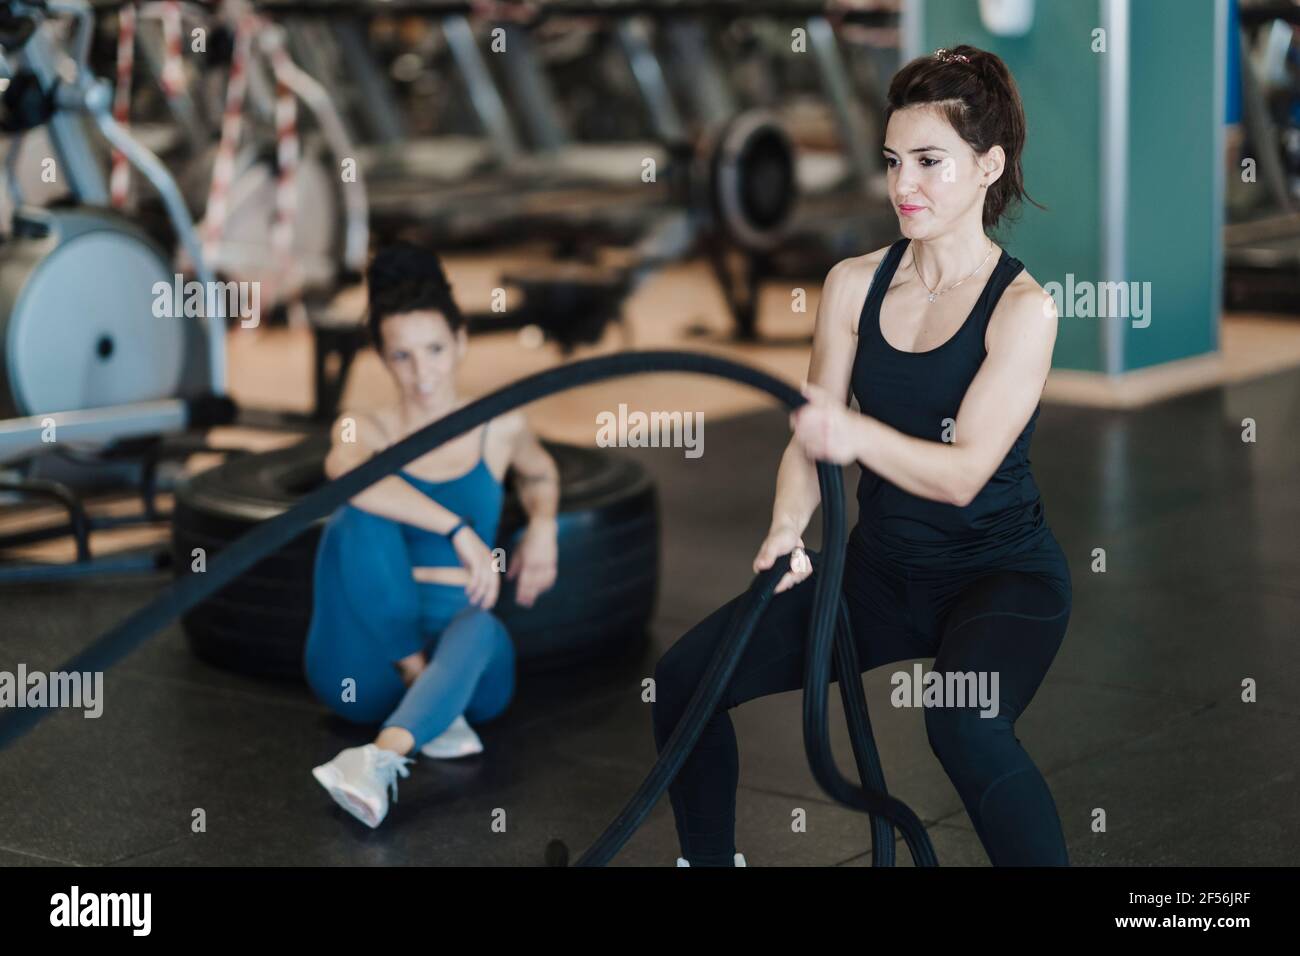 Female sportsperson exercising with rope during strength training in gym Stock Photo